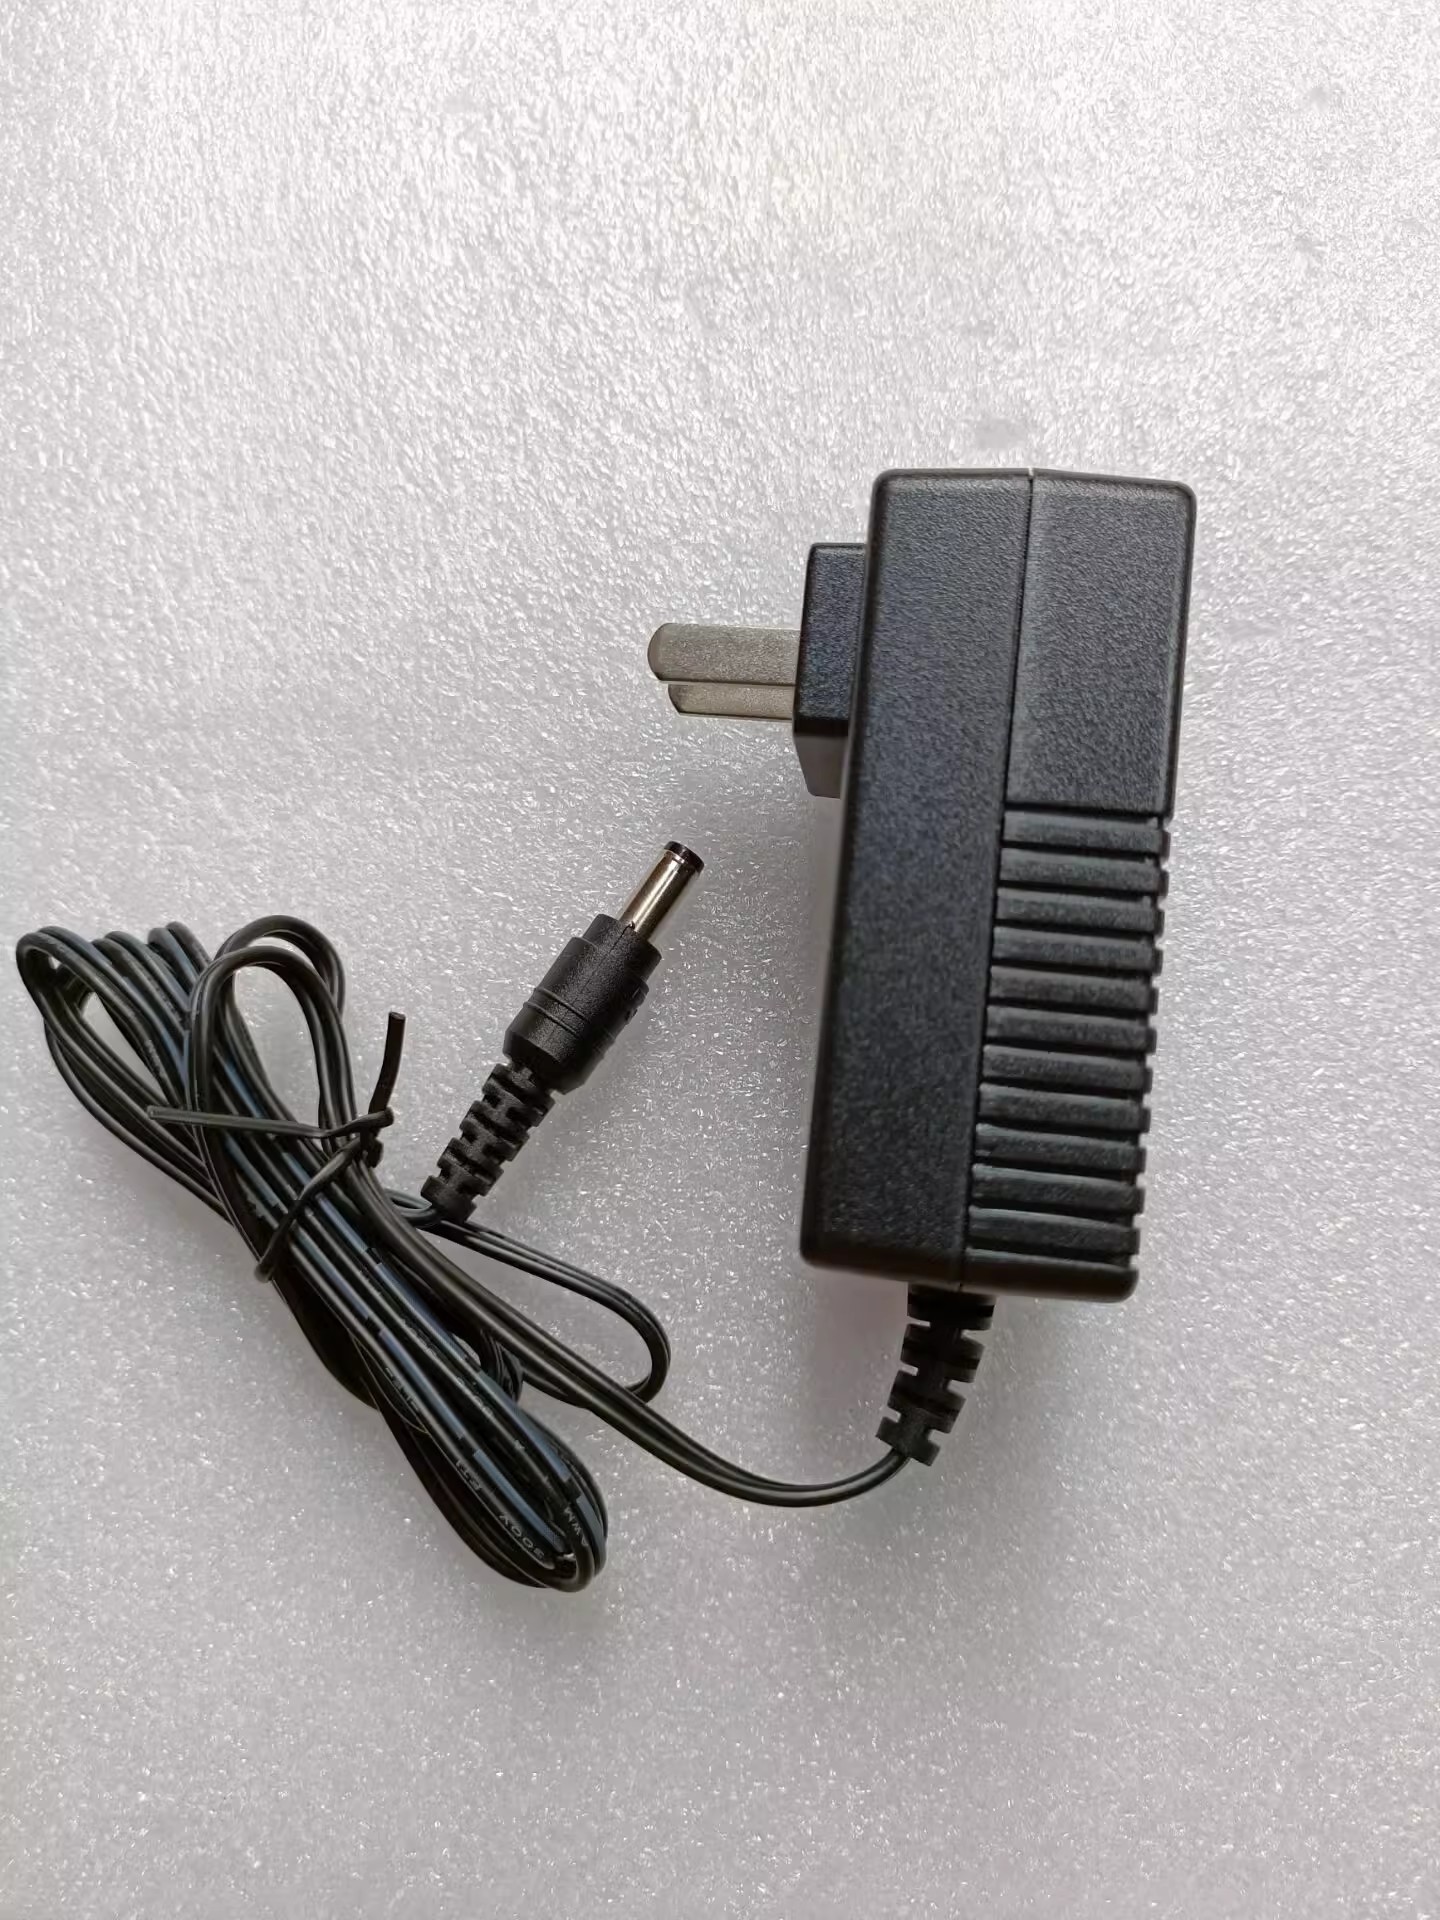 *Brand NEW*5.5*2.1MM 12V 2A AC DC ADAPTHE KW300-120C20 POWER Supply